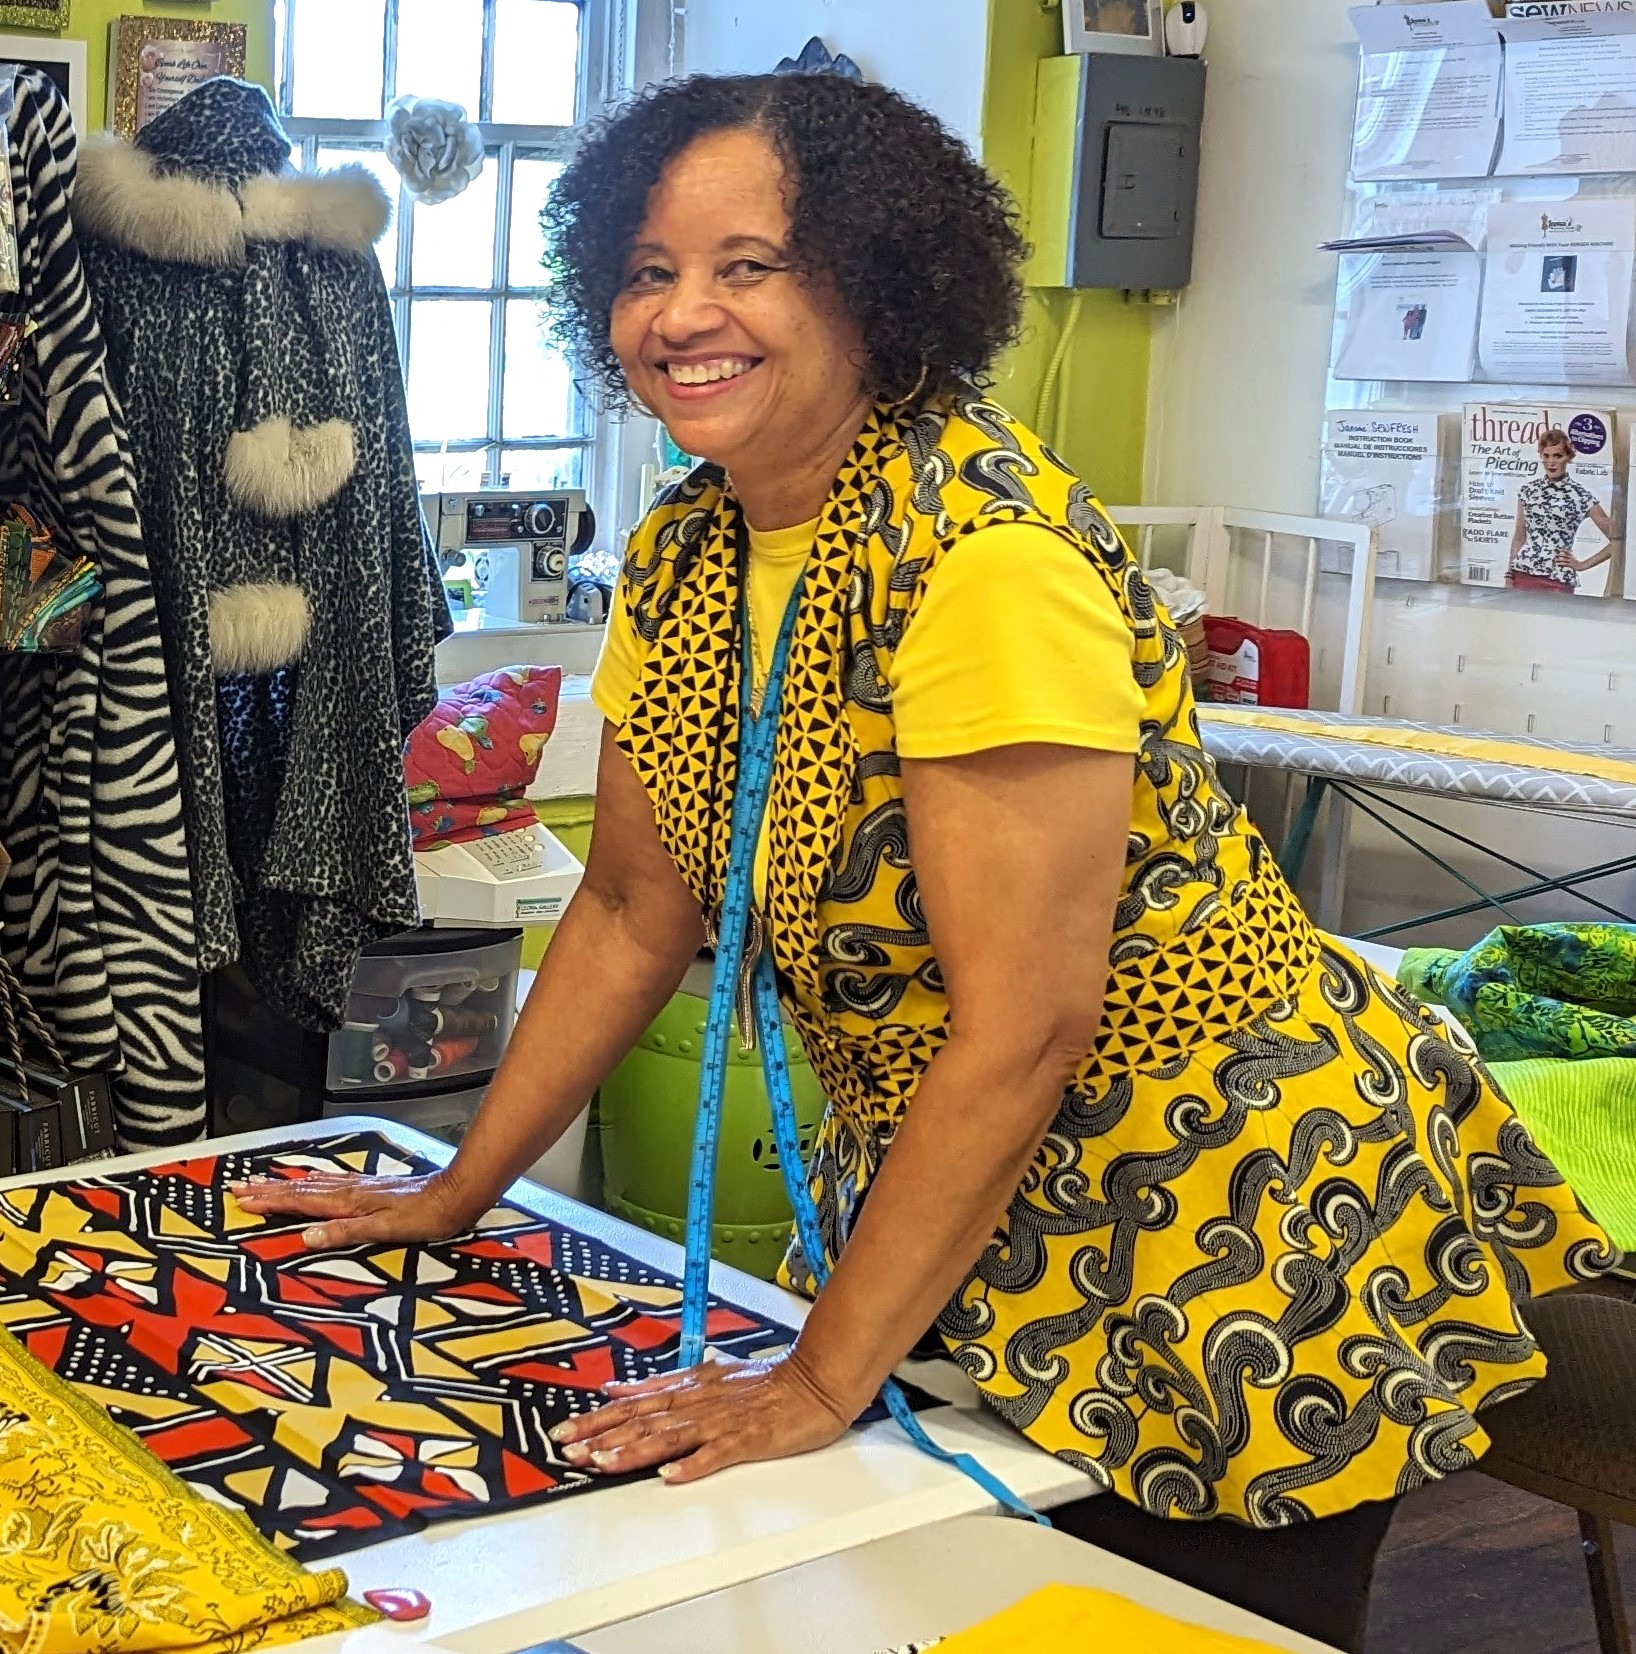 Leona's Sewing Studio provides lessons and camaraderie